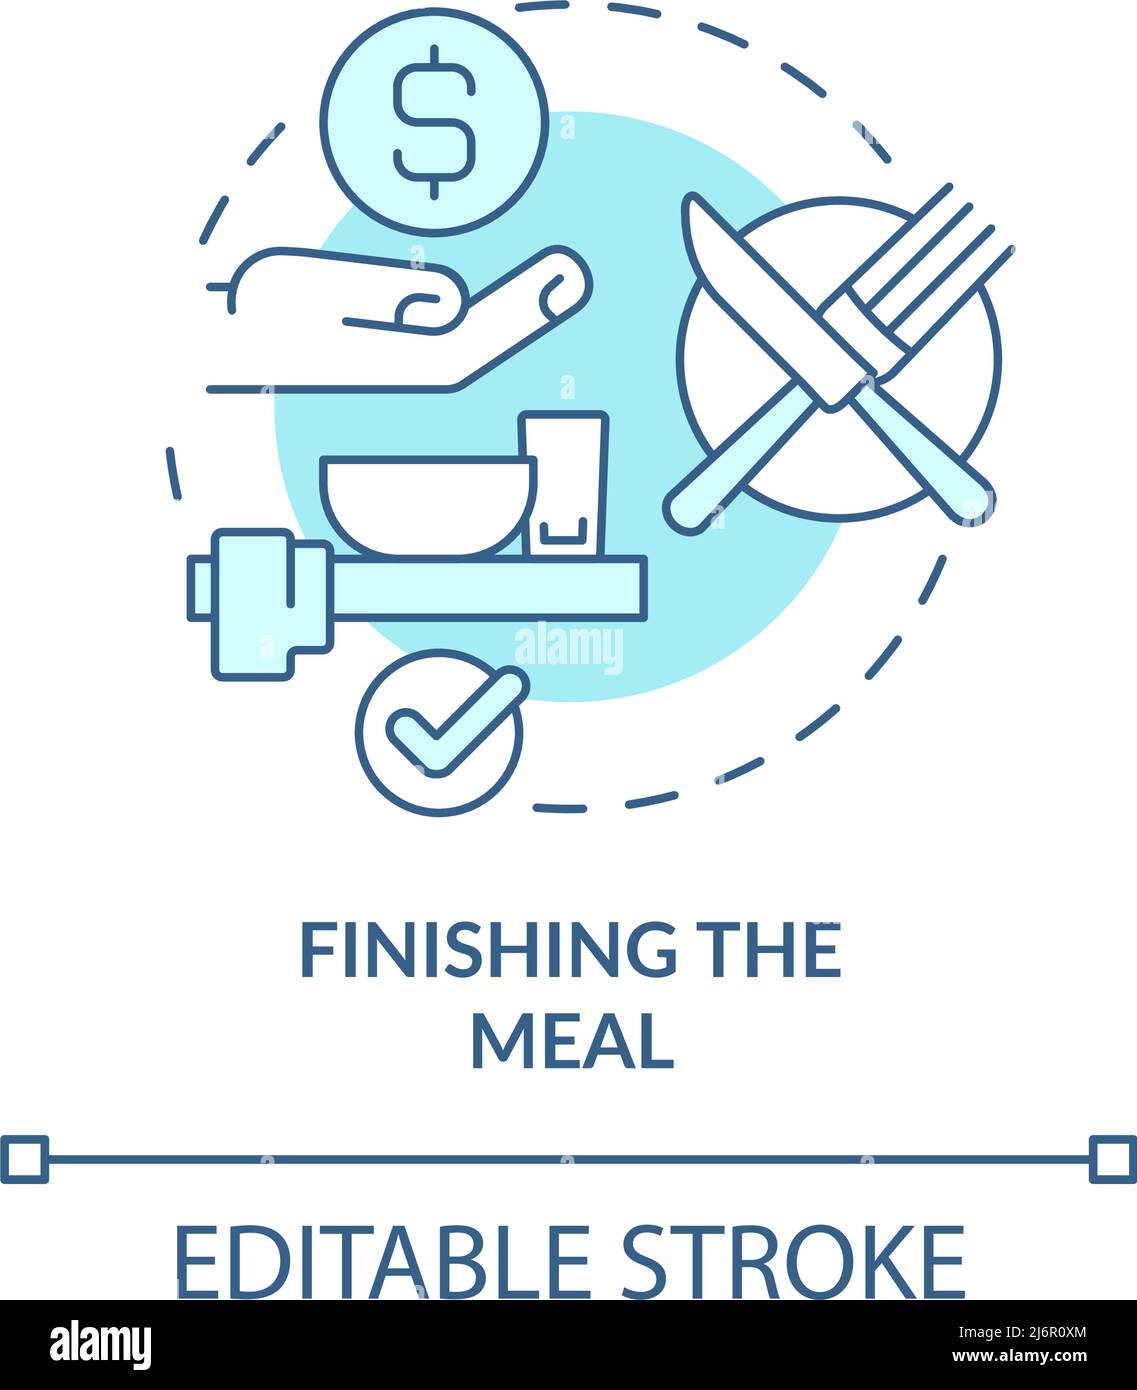 Finishing meal turquoise concept icon Stock Vector